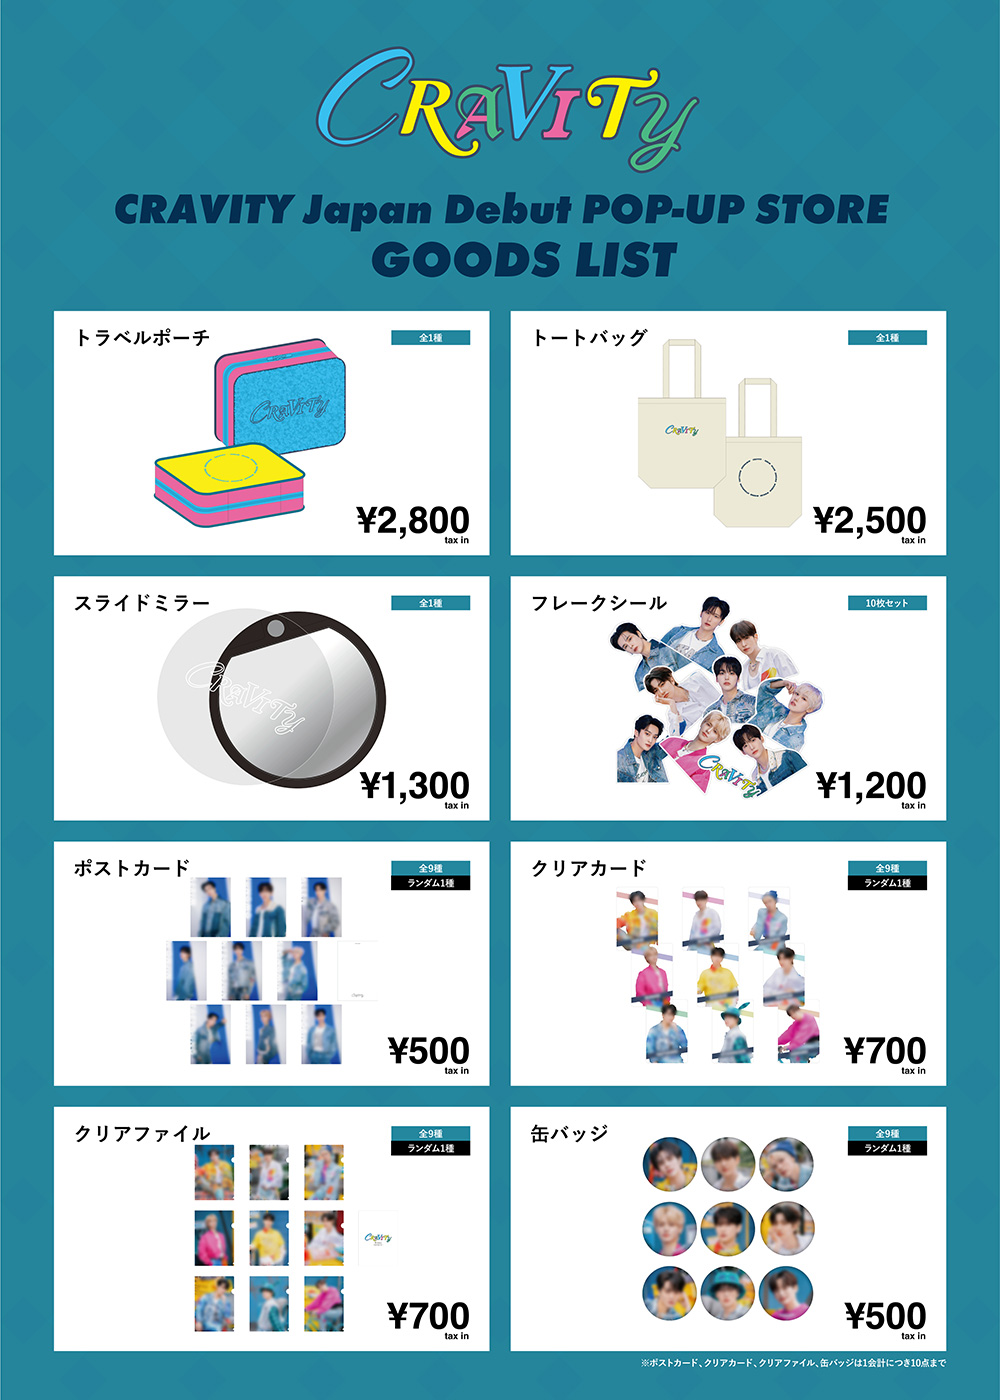 CRAVITY Japan Debut POP-UP STORE 販売グッズ